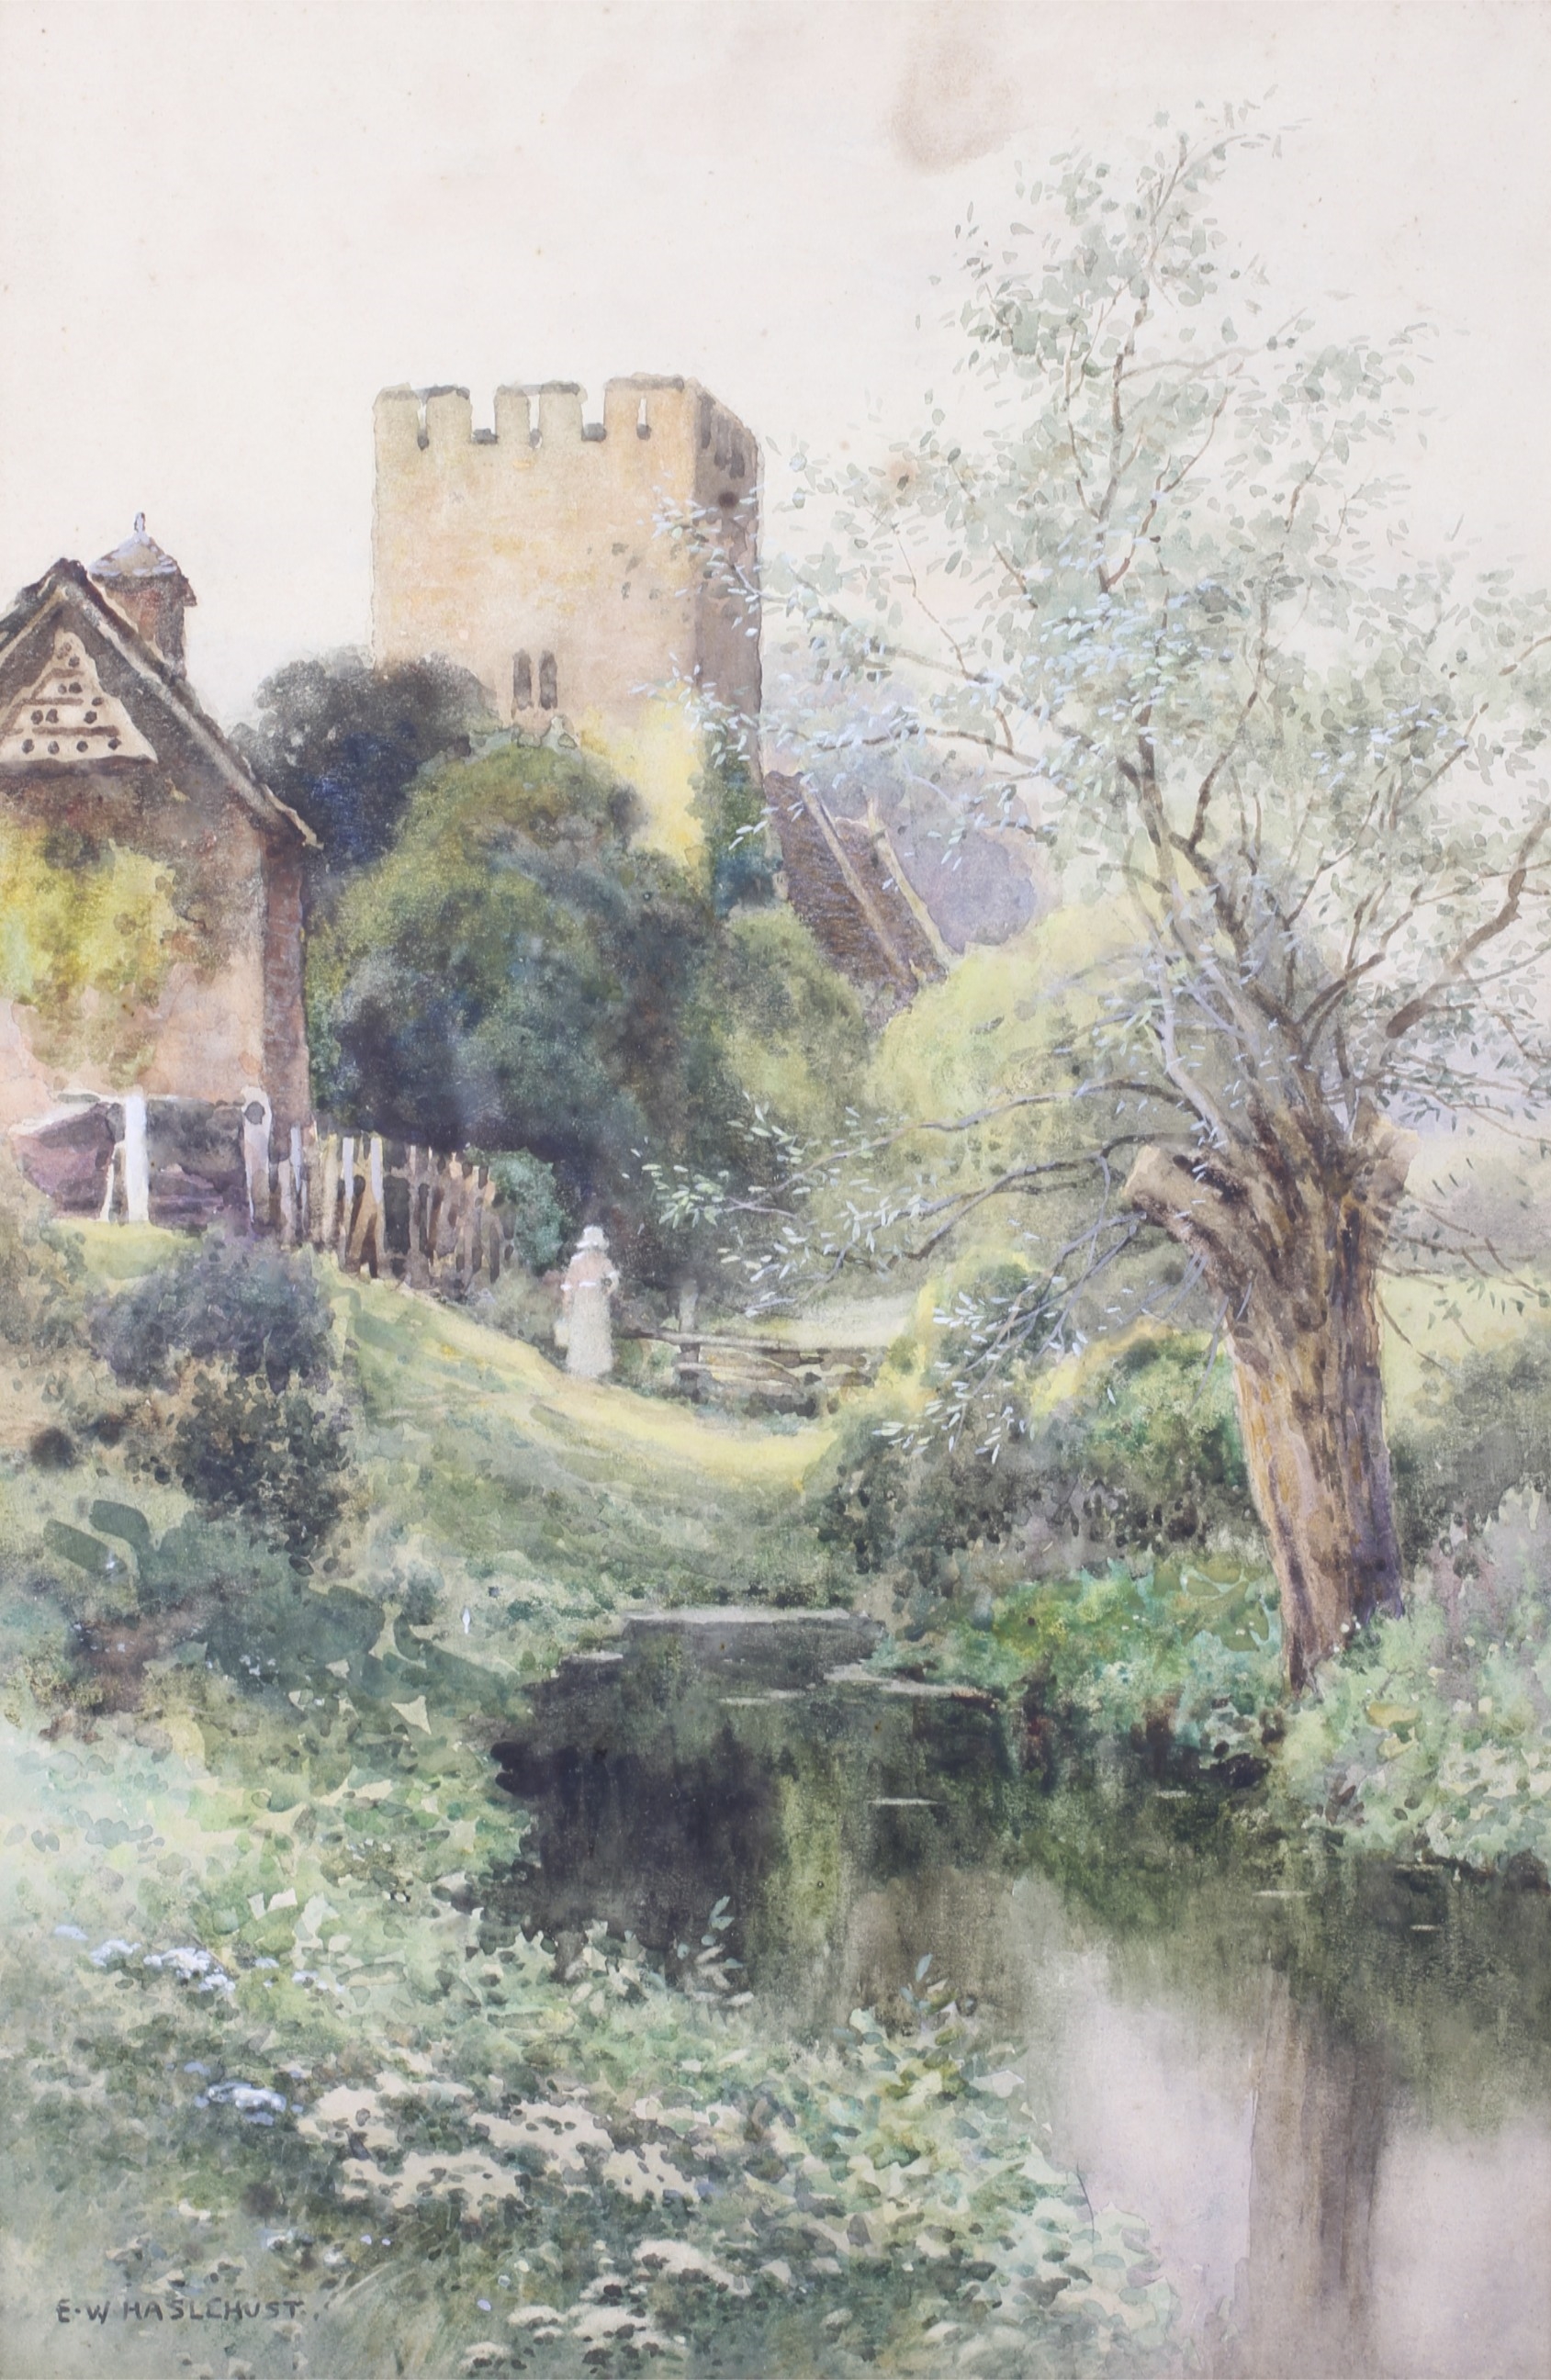 Artwork by Ernest W. Haslehust, St Mary's 'Monnington-on-Wye Church, Hereford', Made of Watercolour